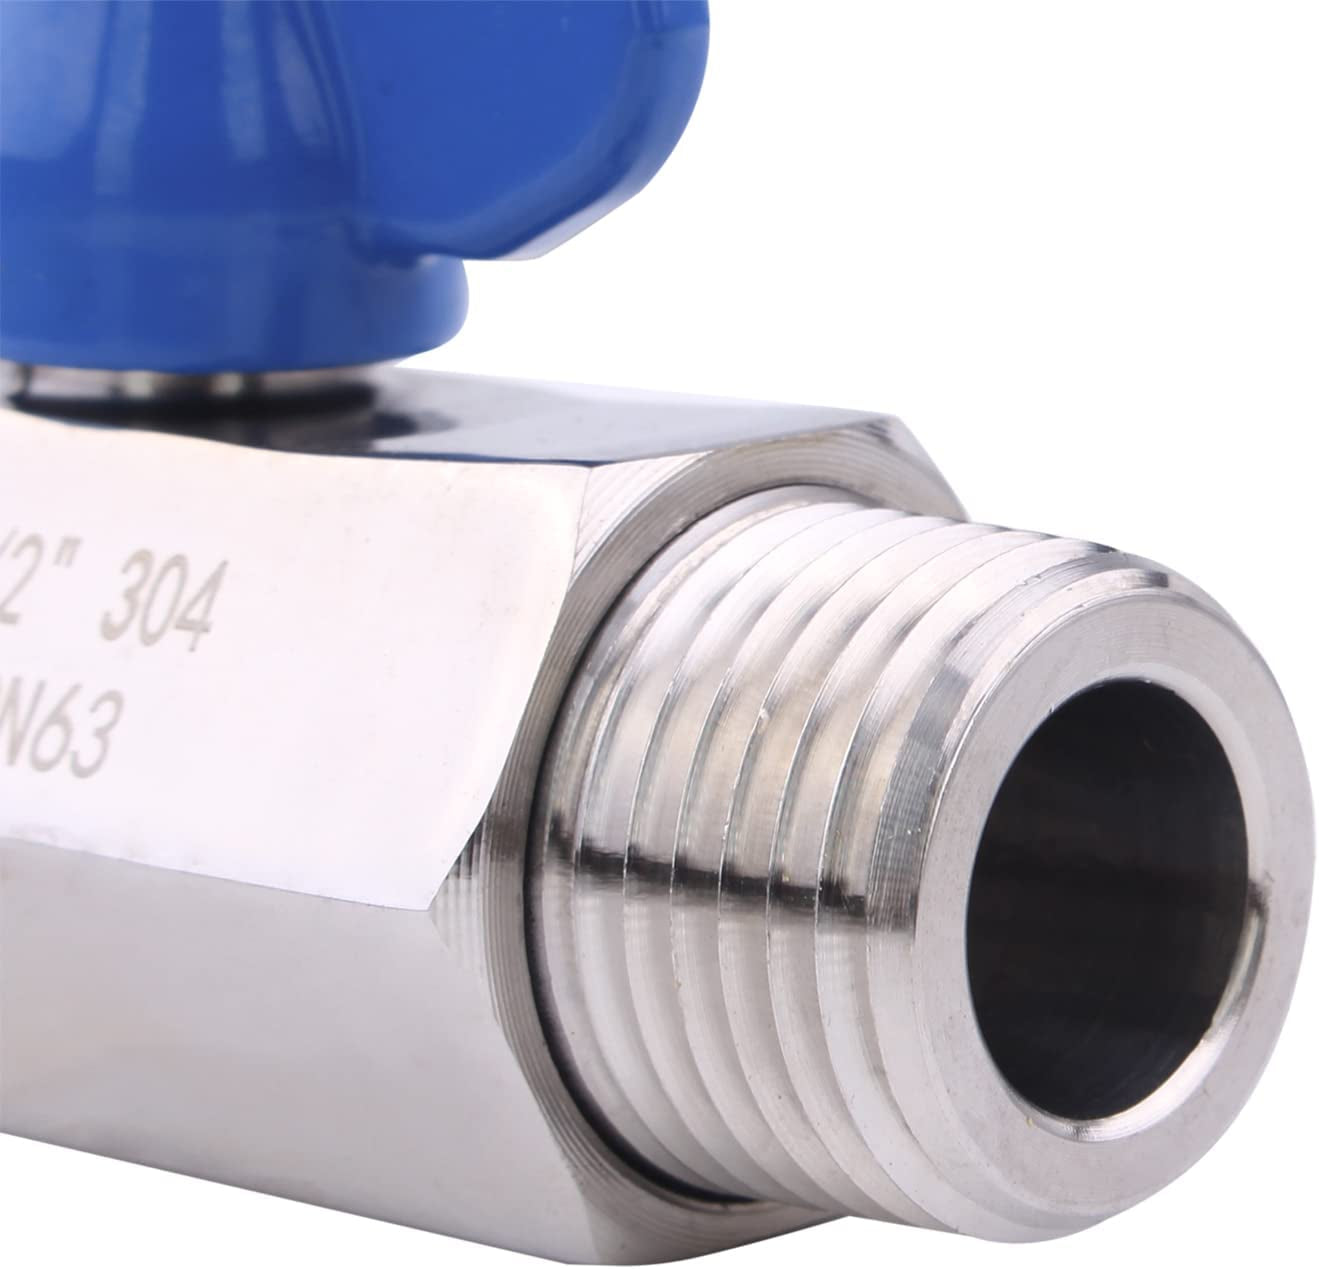 Stainless Steel Ball Valve - 1/2 Inch NPT Thread Male Small Mini Ball Valve (1/2" Male&Male)